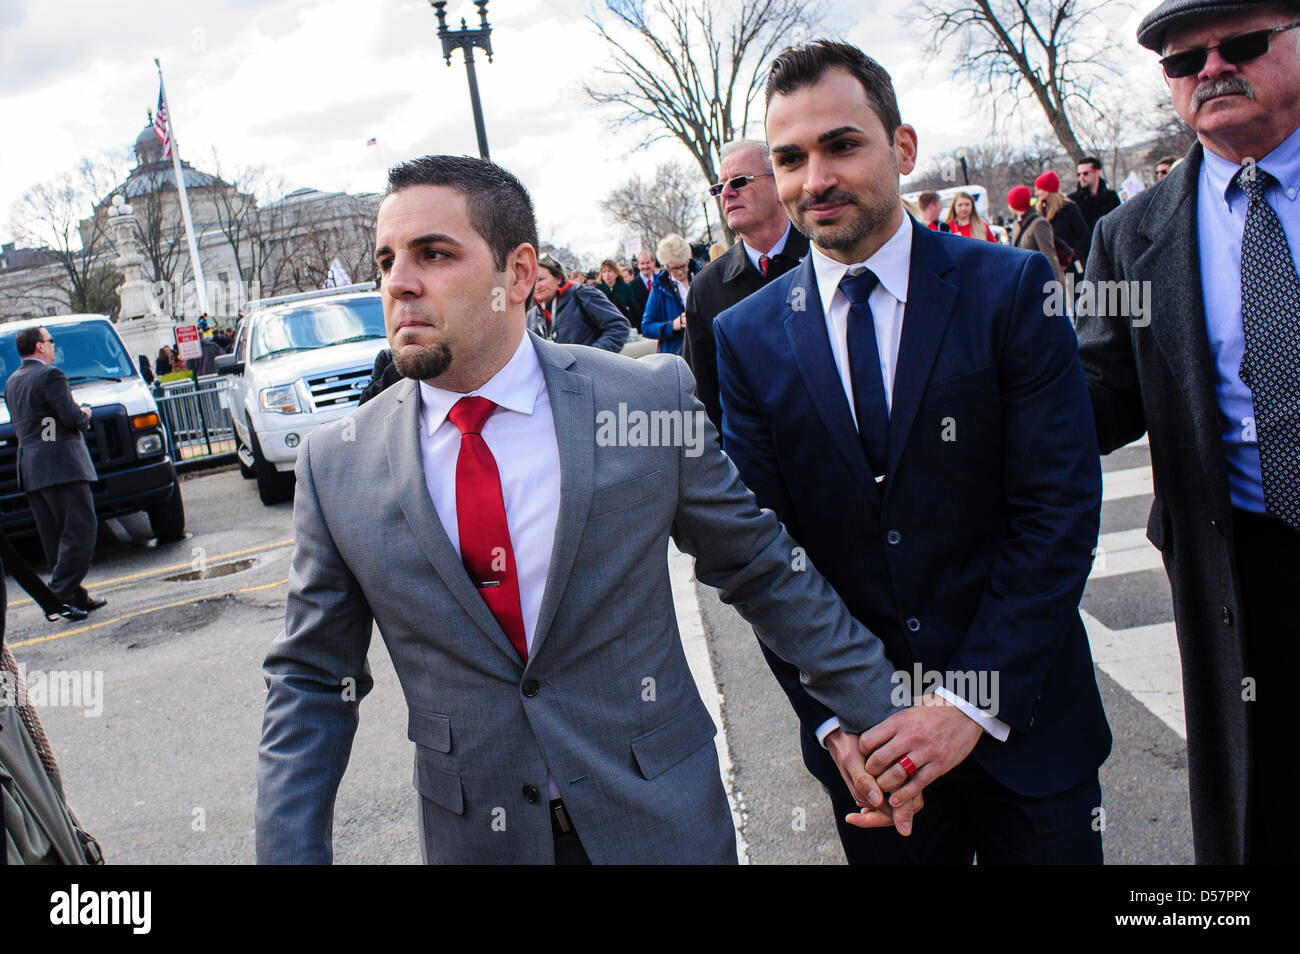 March 26, 2013 - Washington, District of Columbia, U.S. - Prop. 8 Plaintiffs Paul Katami (R) and Jeff Zarrillo leave the Supreme Court in Washington, D.C. after the Court heard arguments for the first time Tuesday on whether gays and lesbians have a constitutional right to marry in a California case that could affect the law nationwide. (Credit Image: © Pete Marovich/ZUMAPRESS.com) Stock Photo